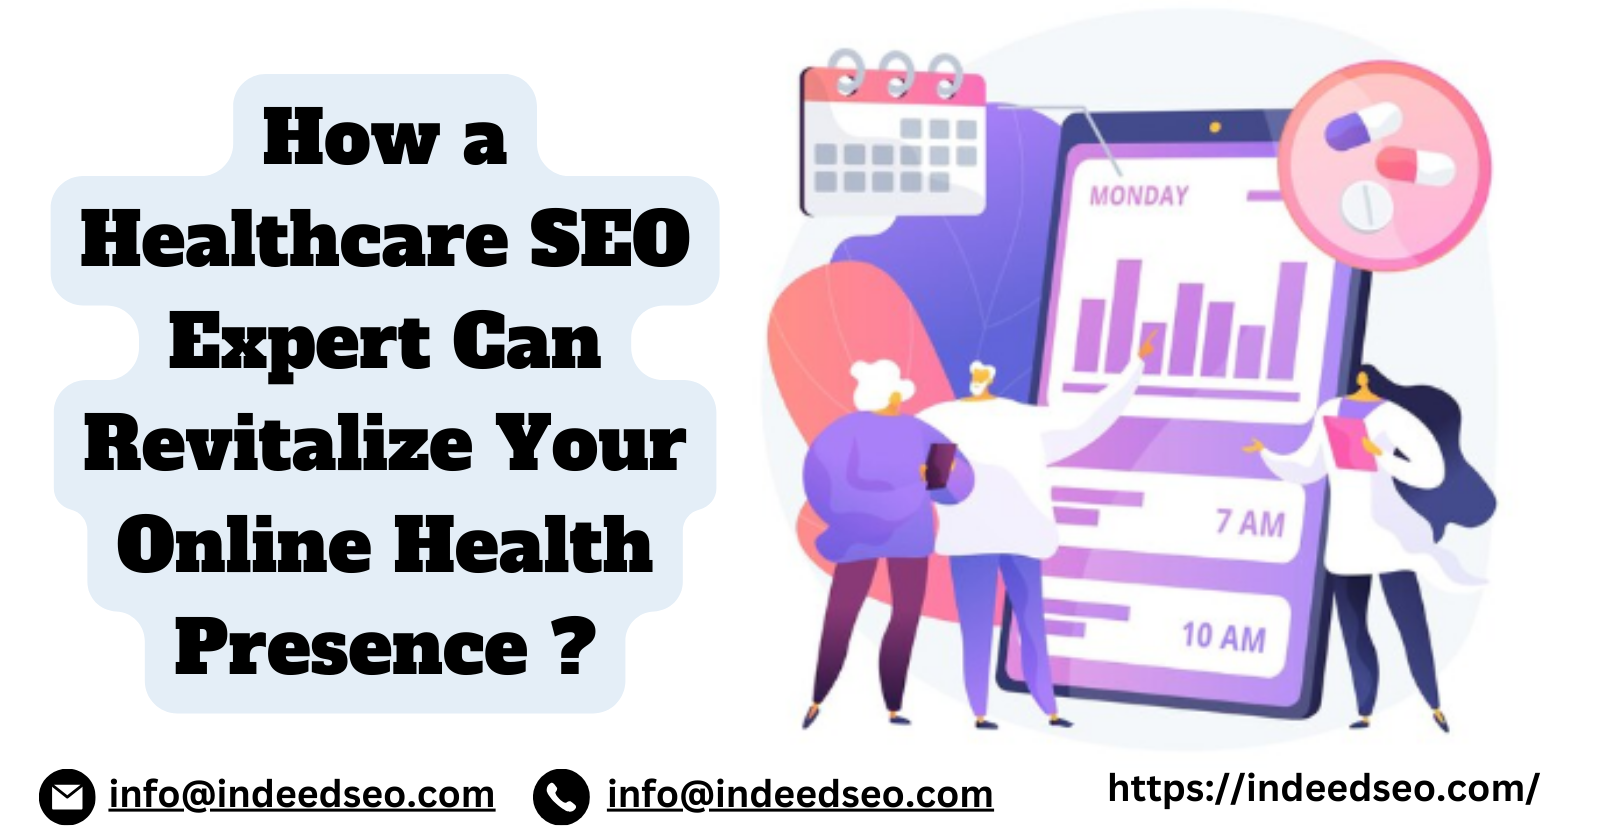 How a Healthcare SEO Expert Can Revitalize Your Online Health Presence ?